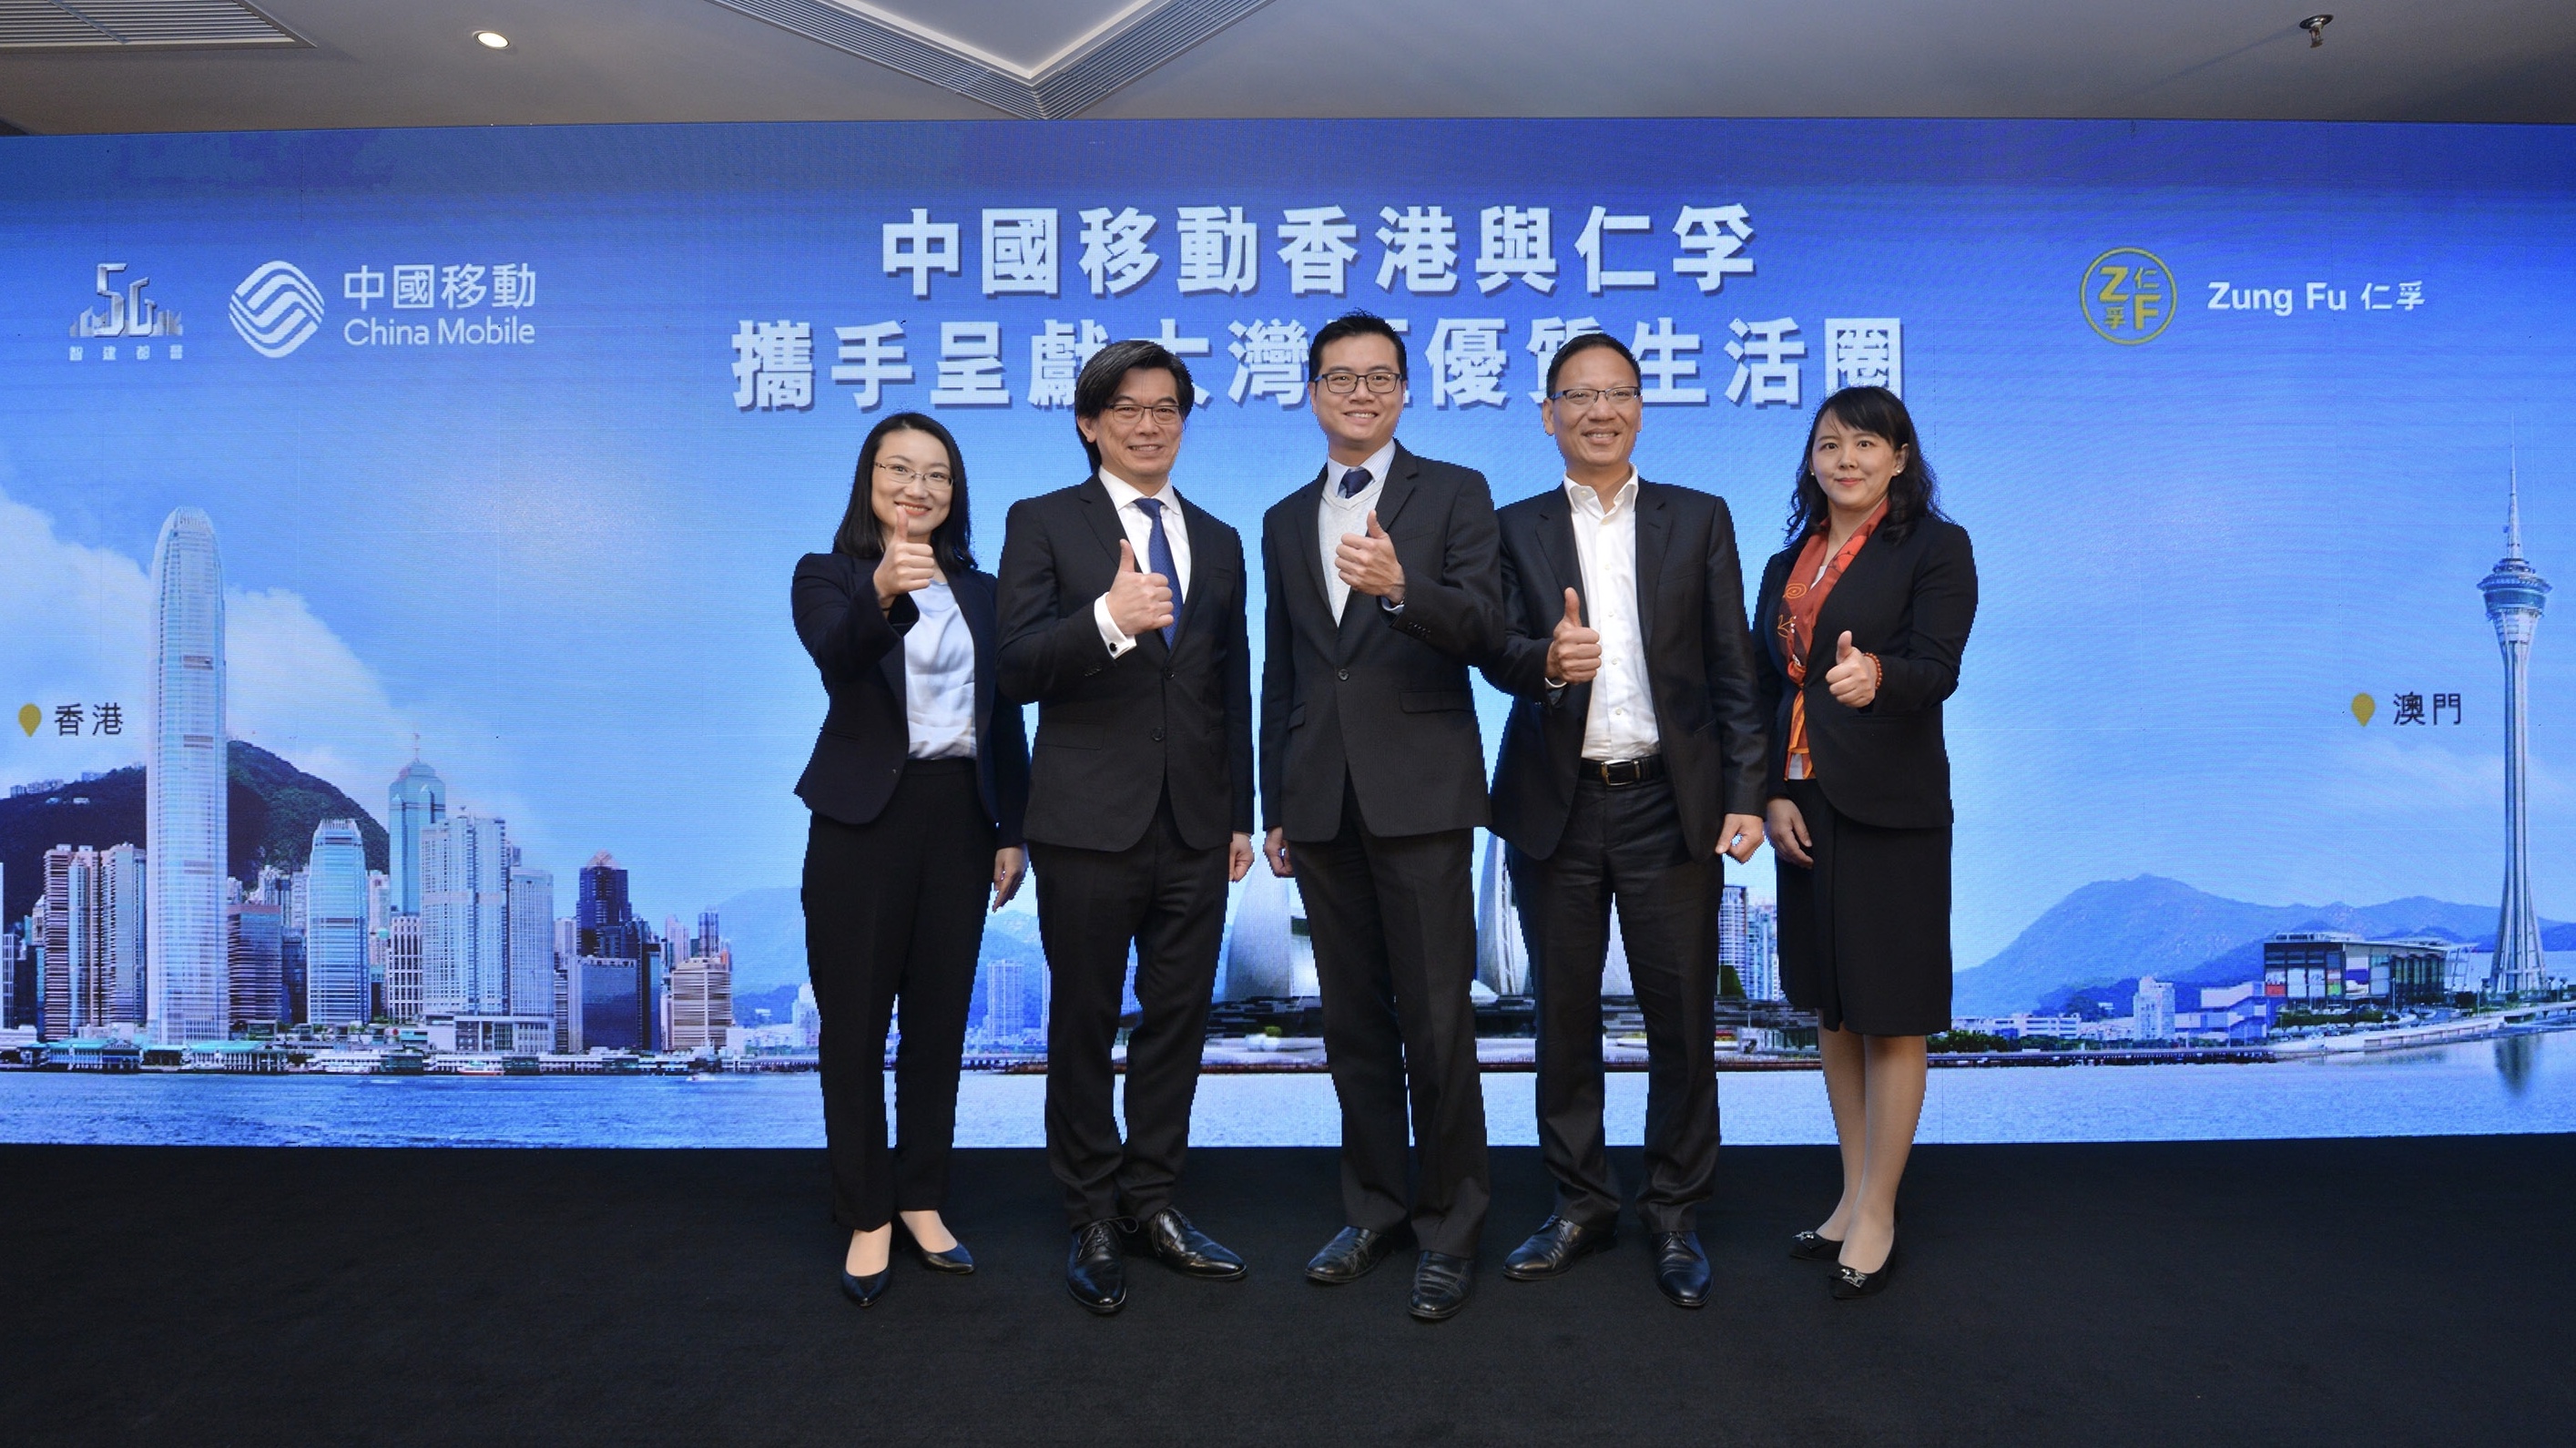 China Mobile Hong Kong and Zung Fu senior management celebrate their collaboration to bring enhanced lifestyle experiences to customers in the Greater Bay Area.